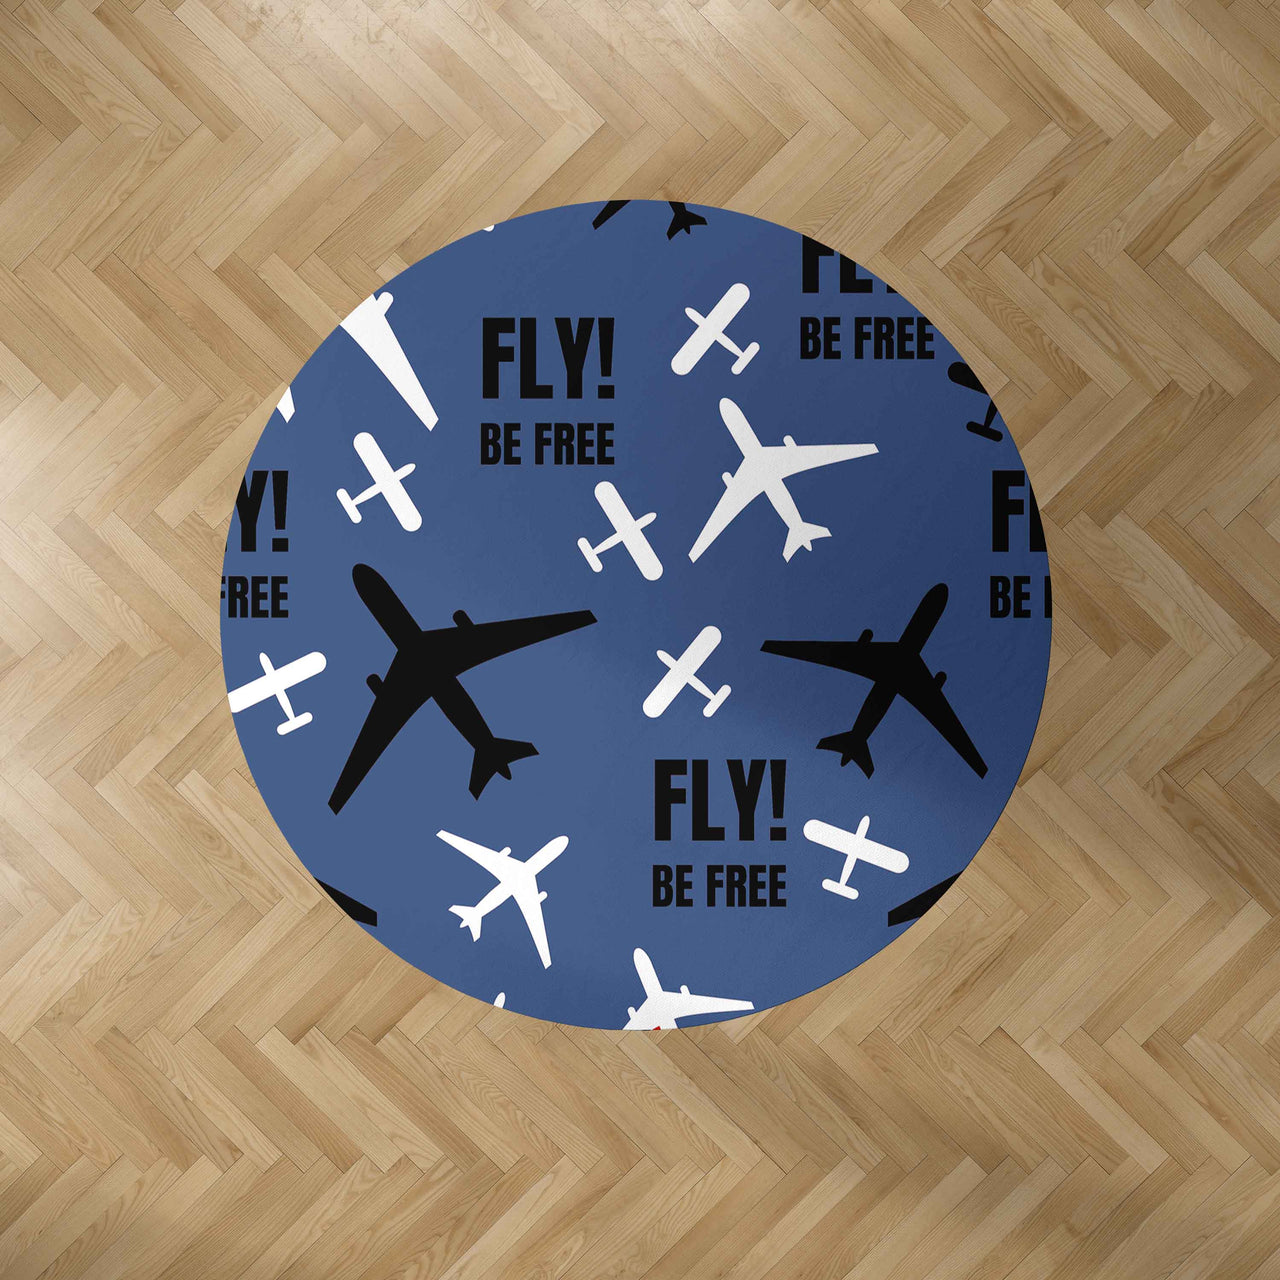 Fly Be Free Blue Designed Carpet & Floor Mats (Round)